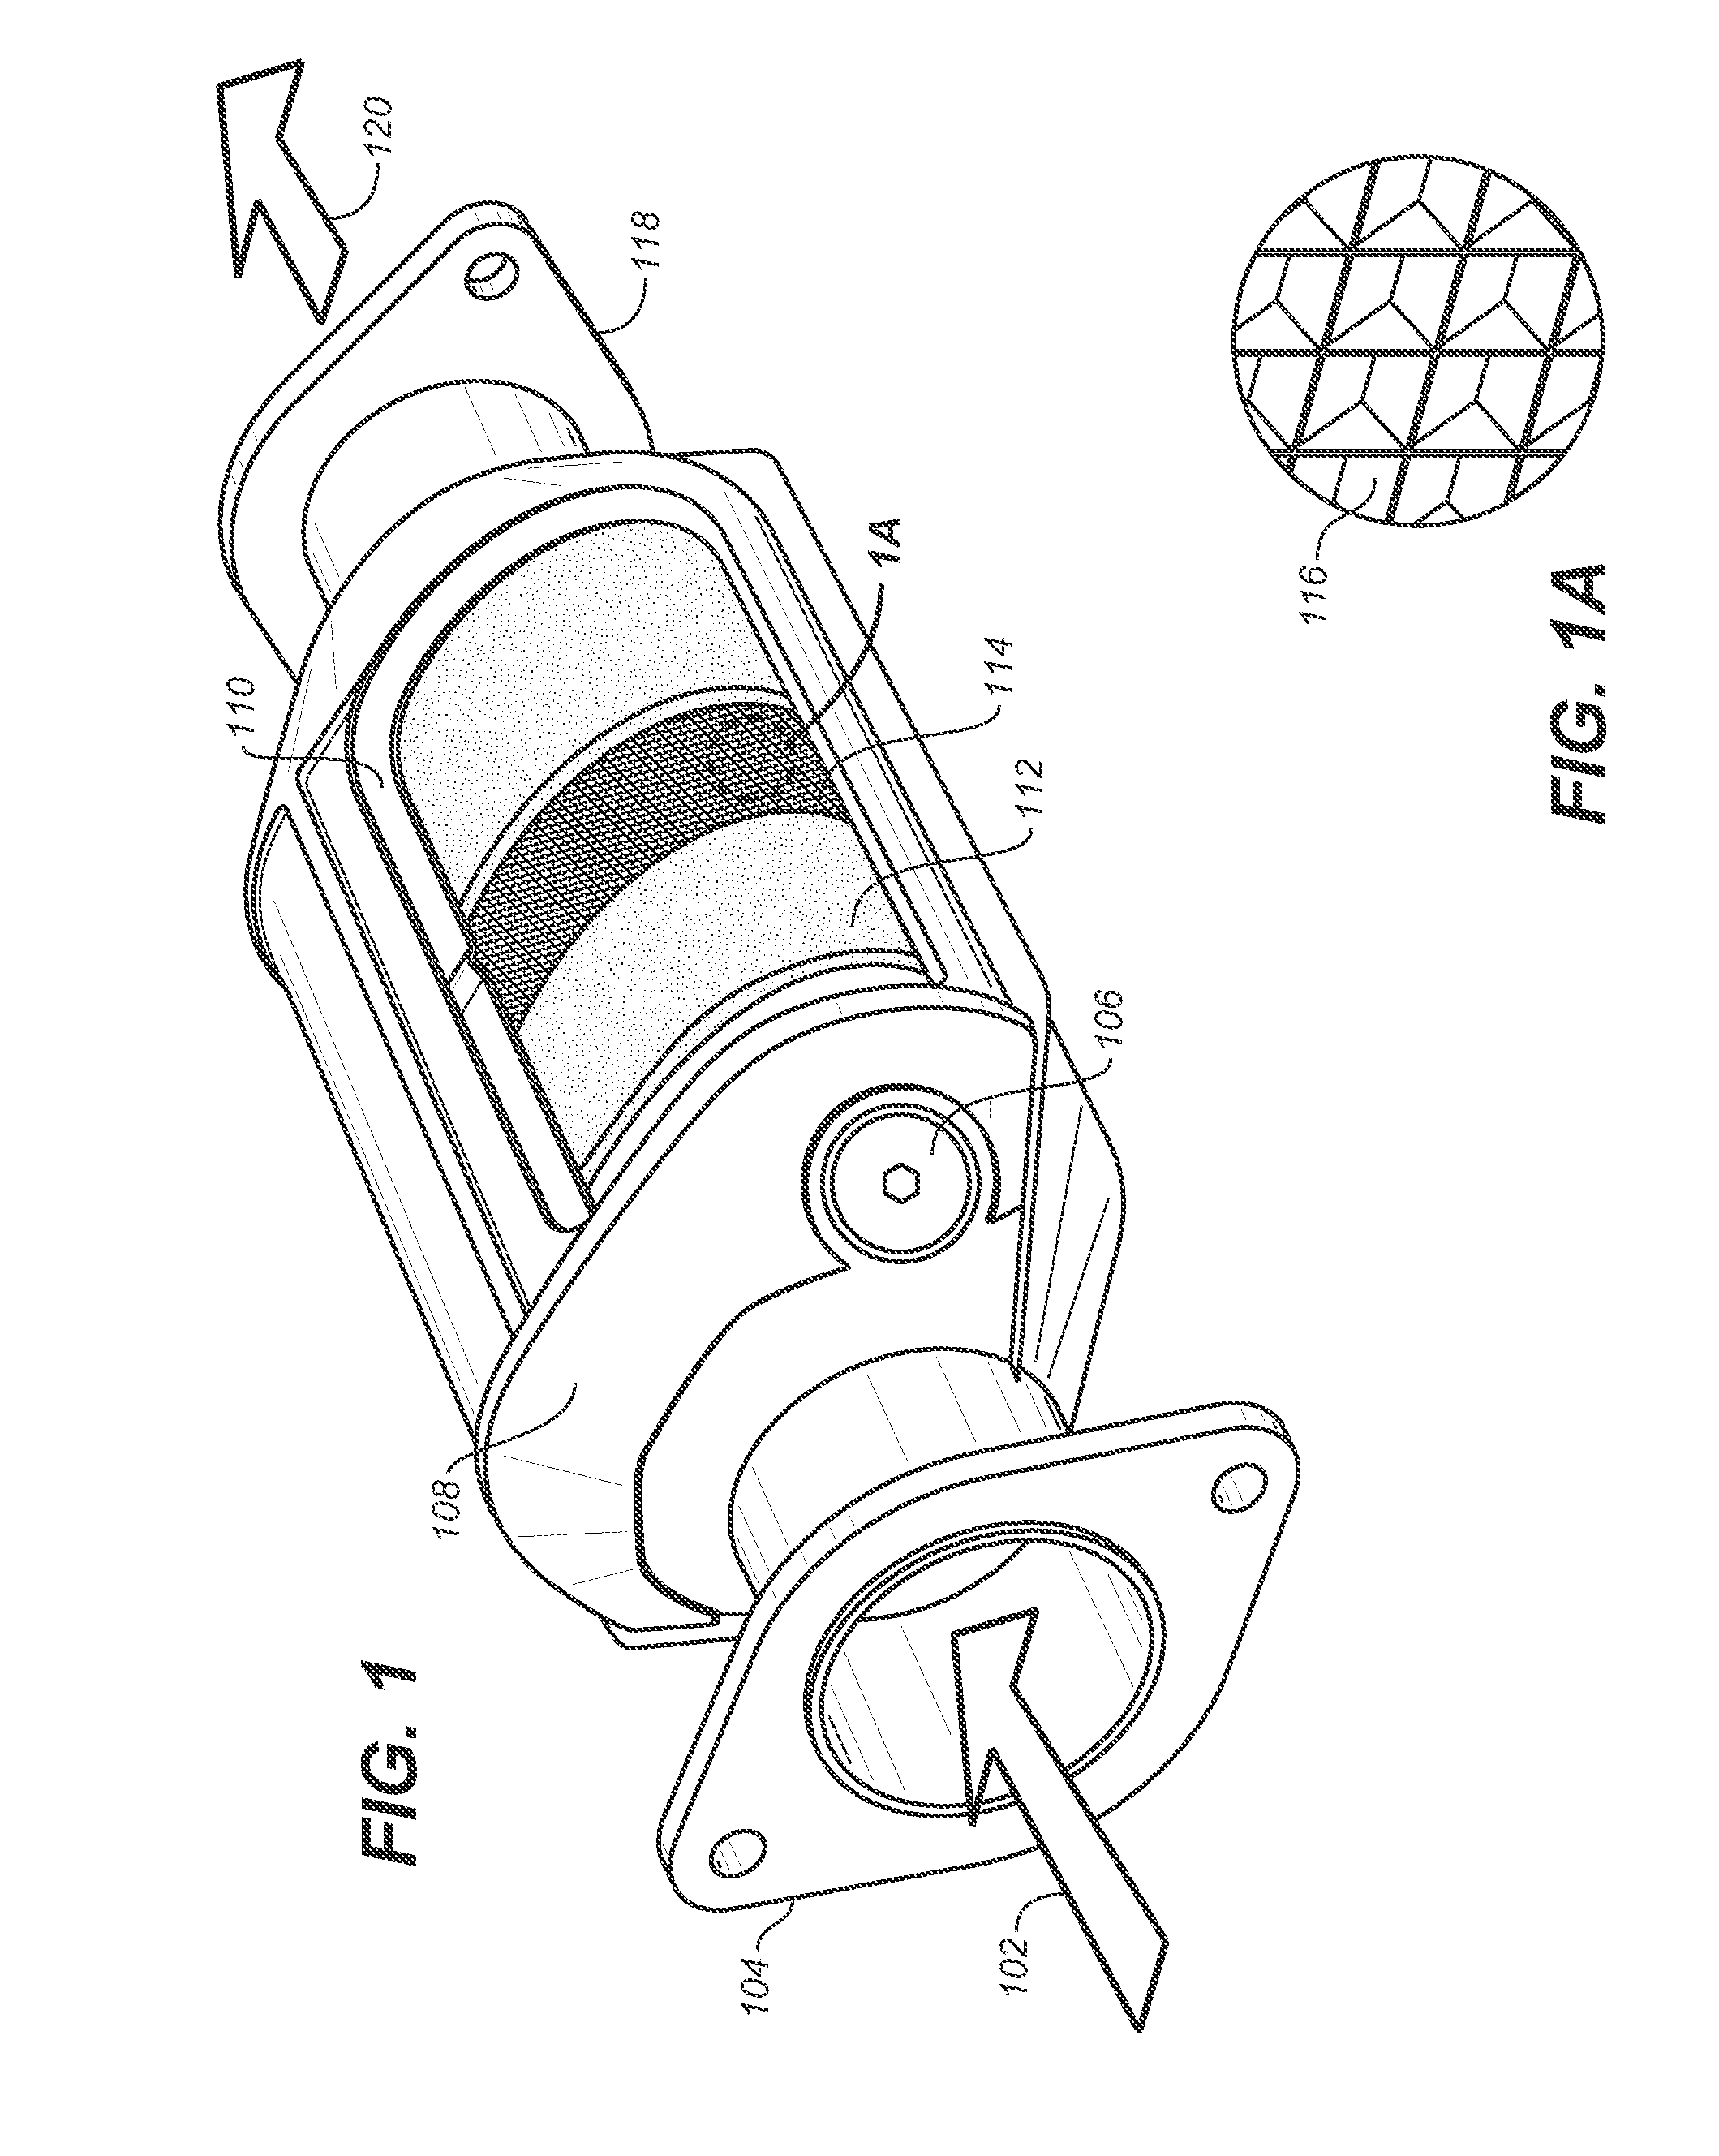 Washcoats and coated substrates for catalytic converters and methods of making and using same